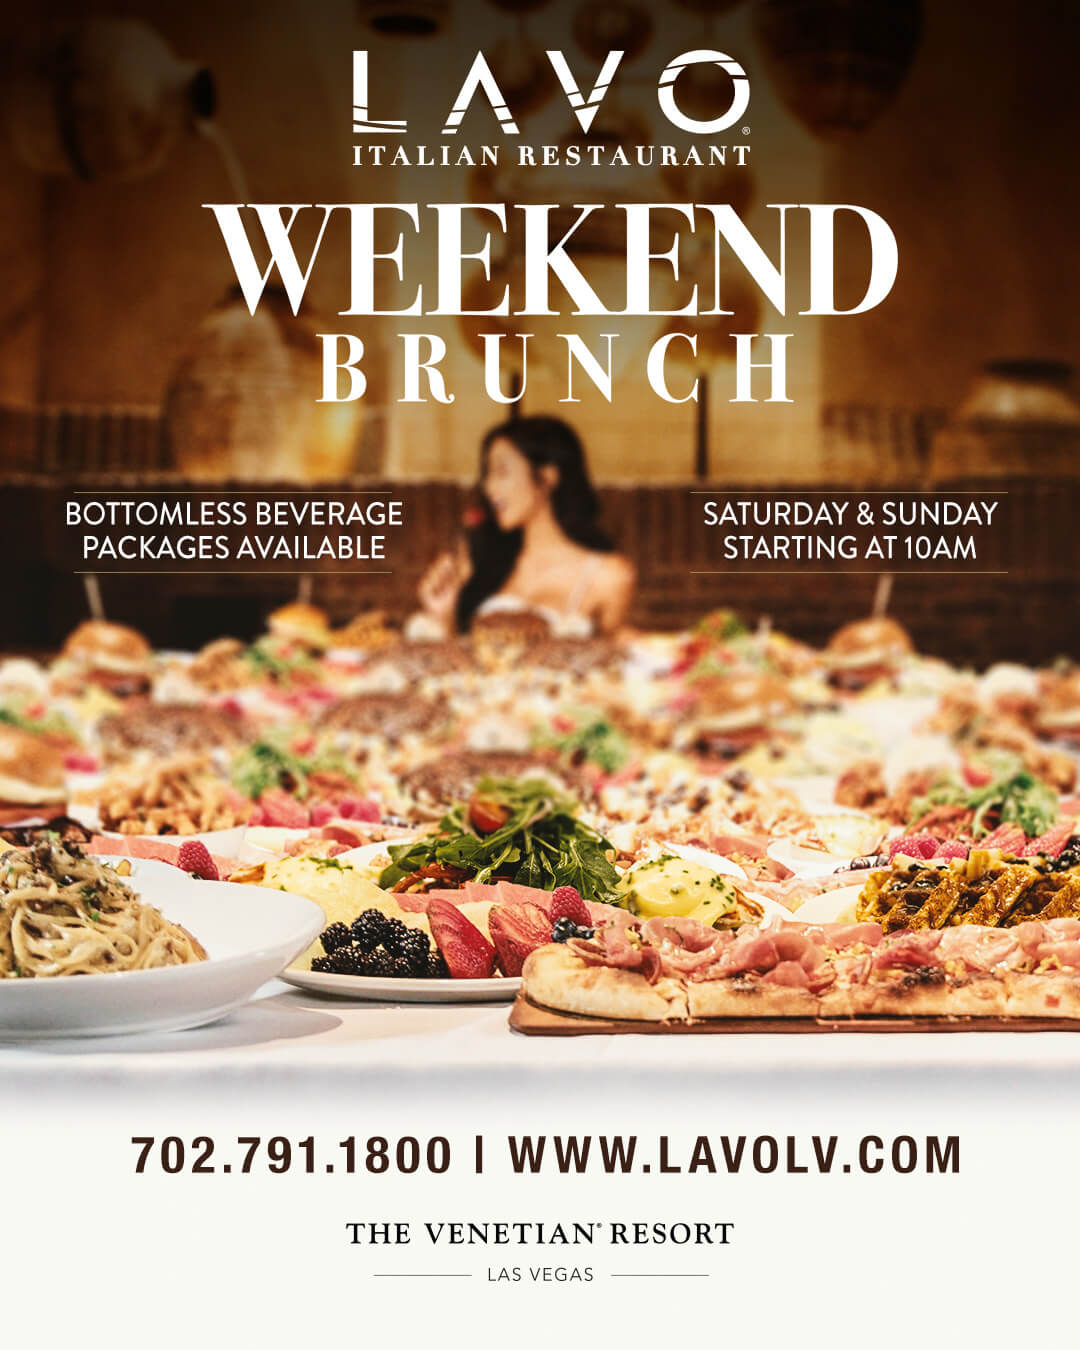 Lavo Endless Weekend Brunch at the palazzo las vegas